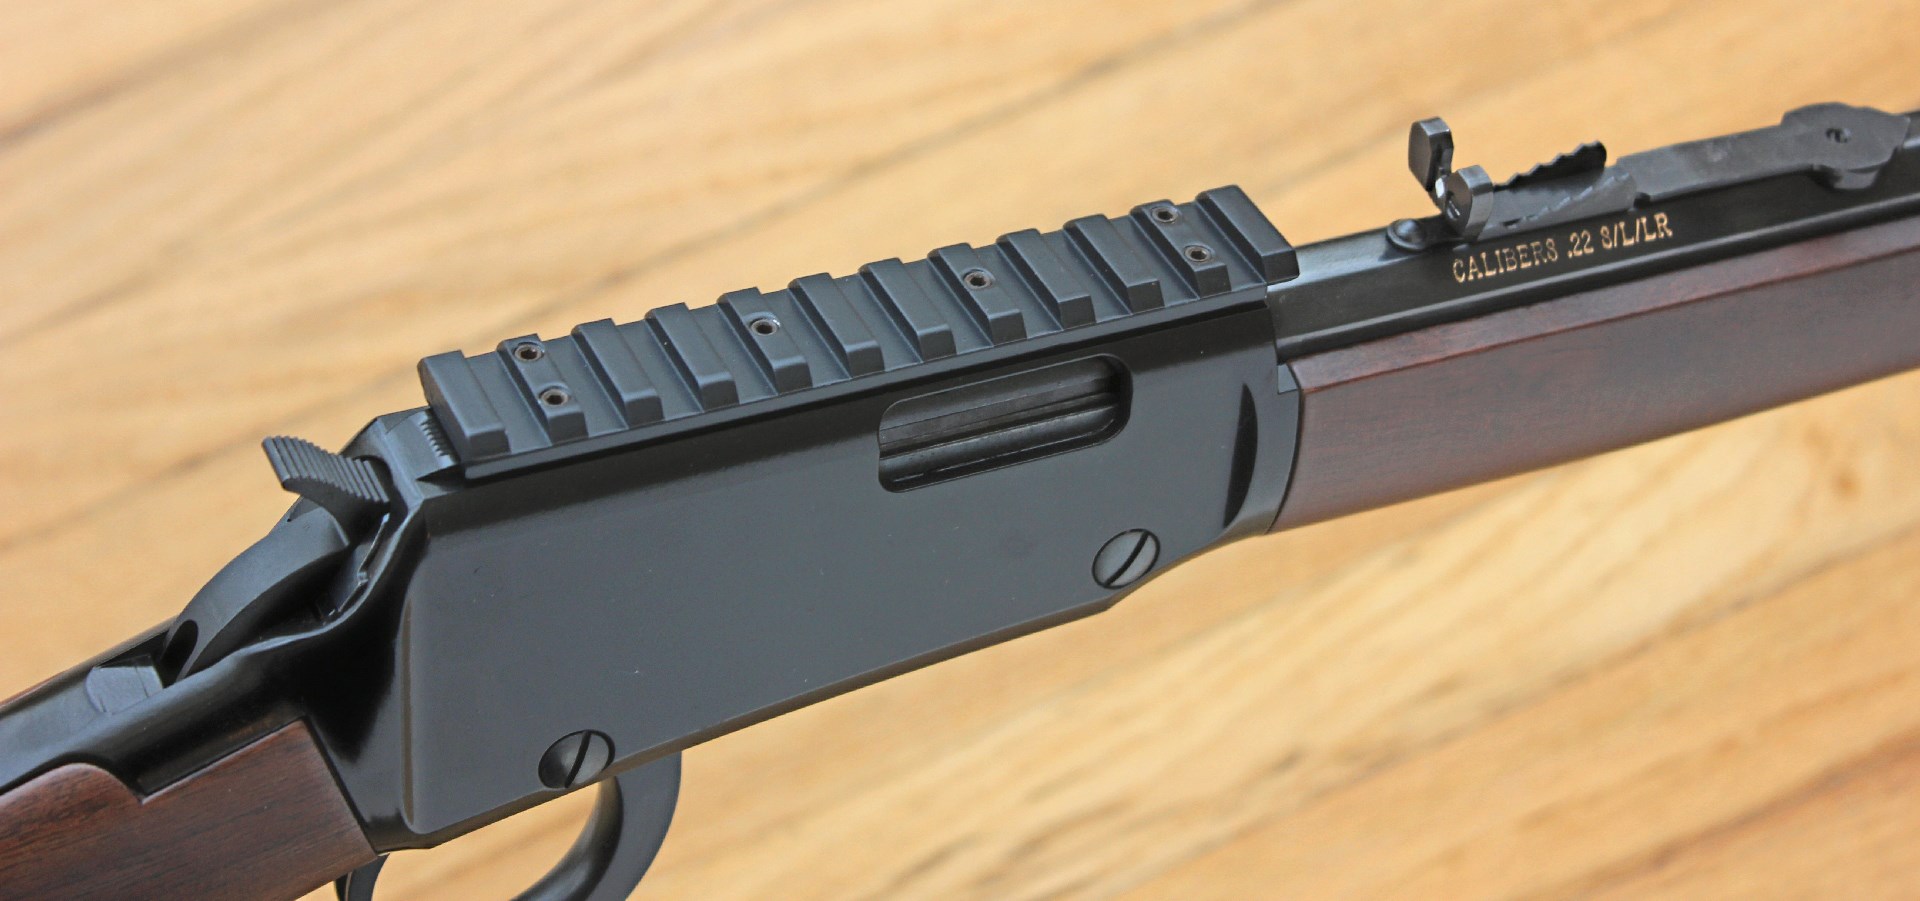 Henry offers the #HLPA001 optics rail for those who prefer Picatinny-type scope mounts.